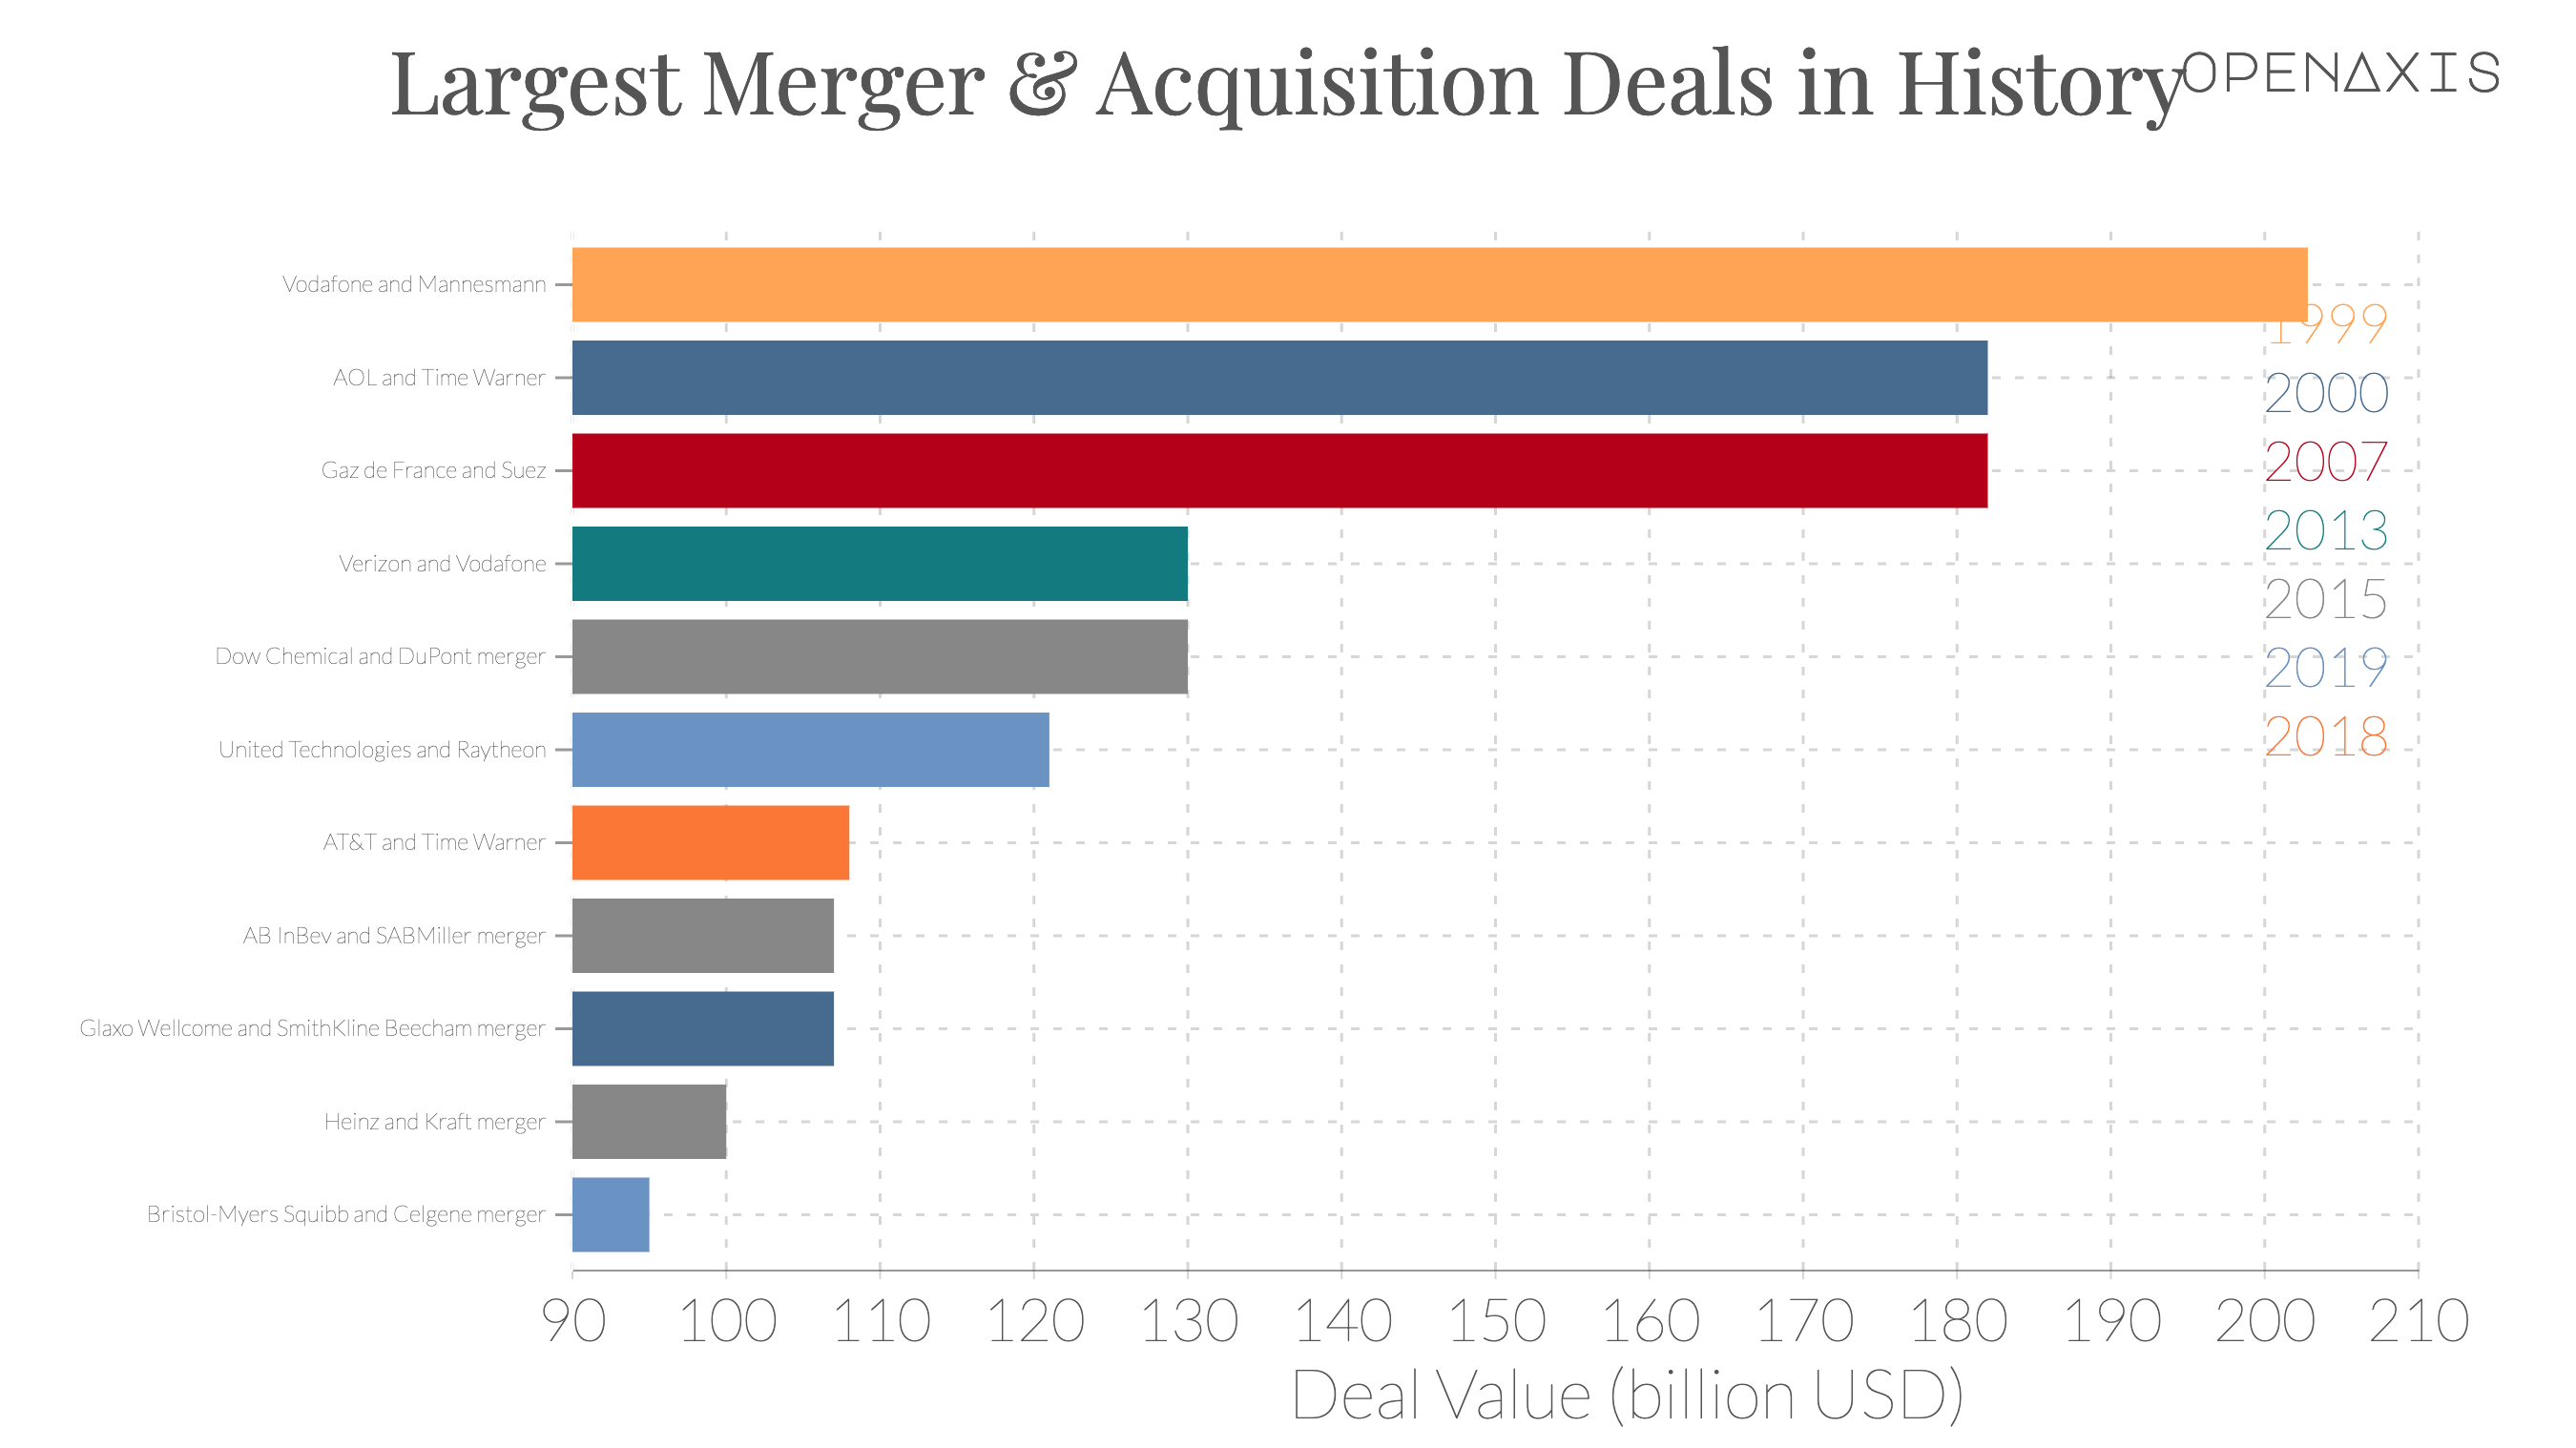 "Largest Merger & Acquisition Deals in History"